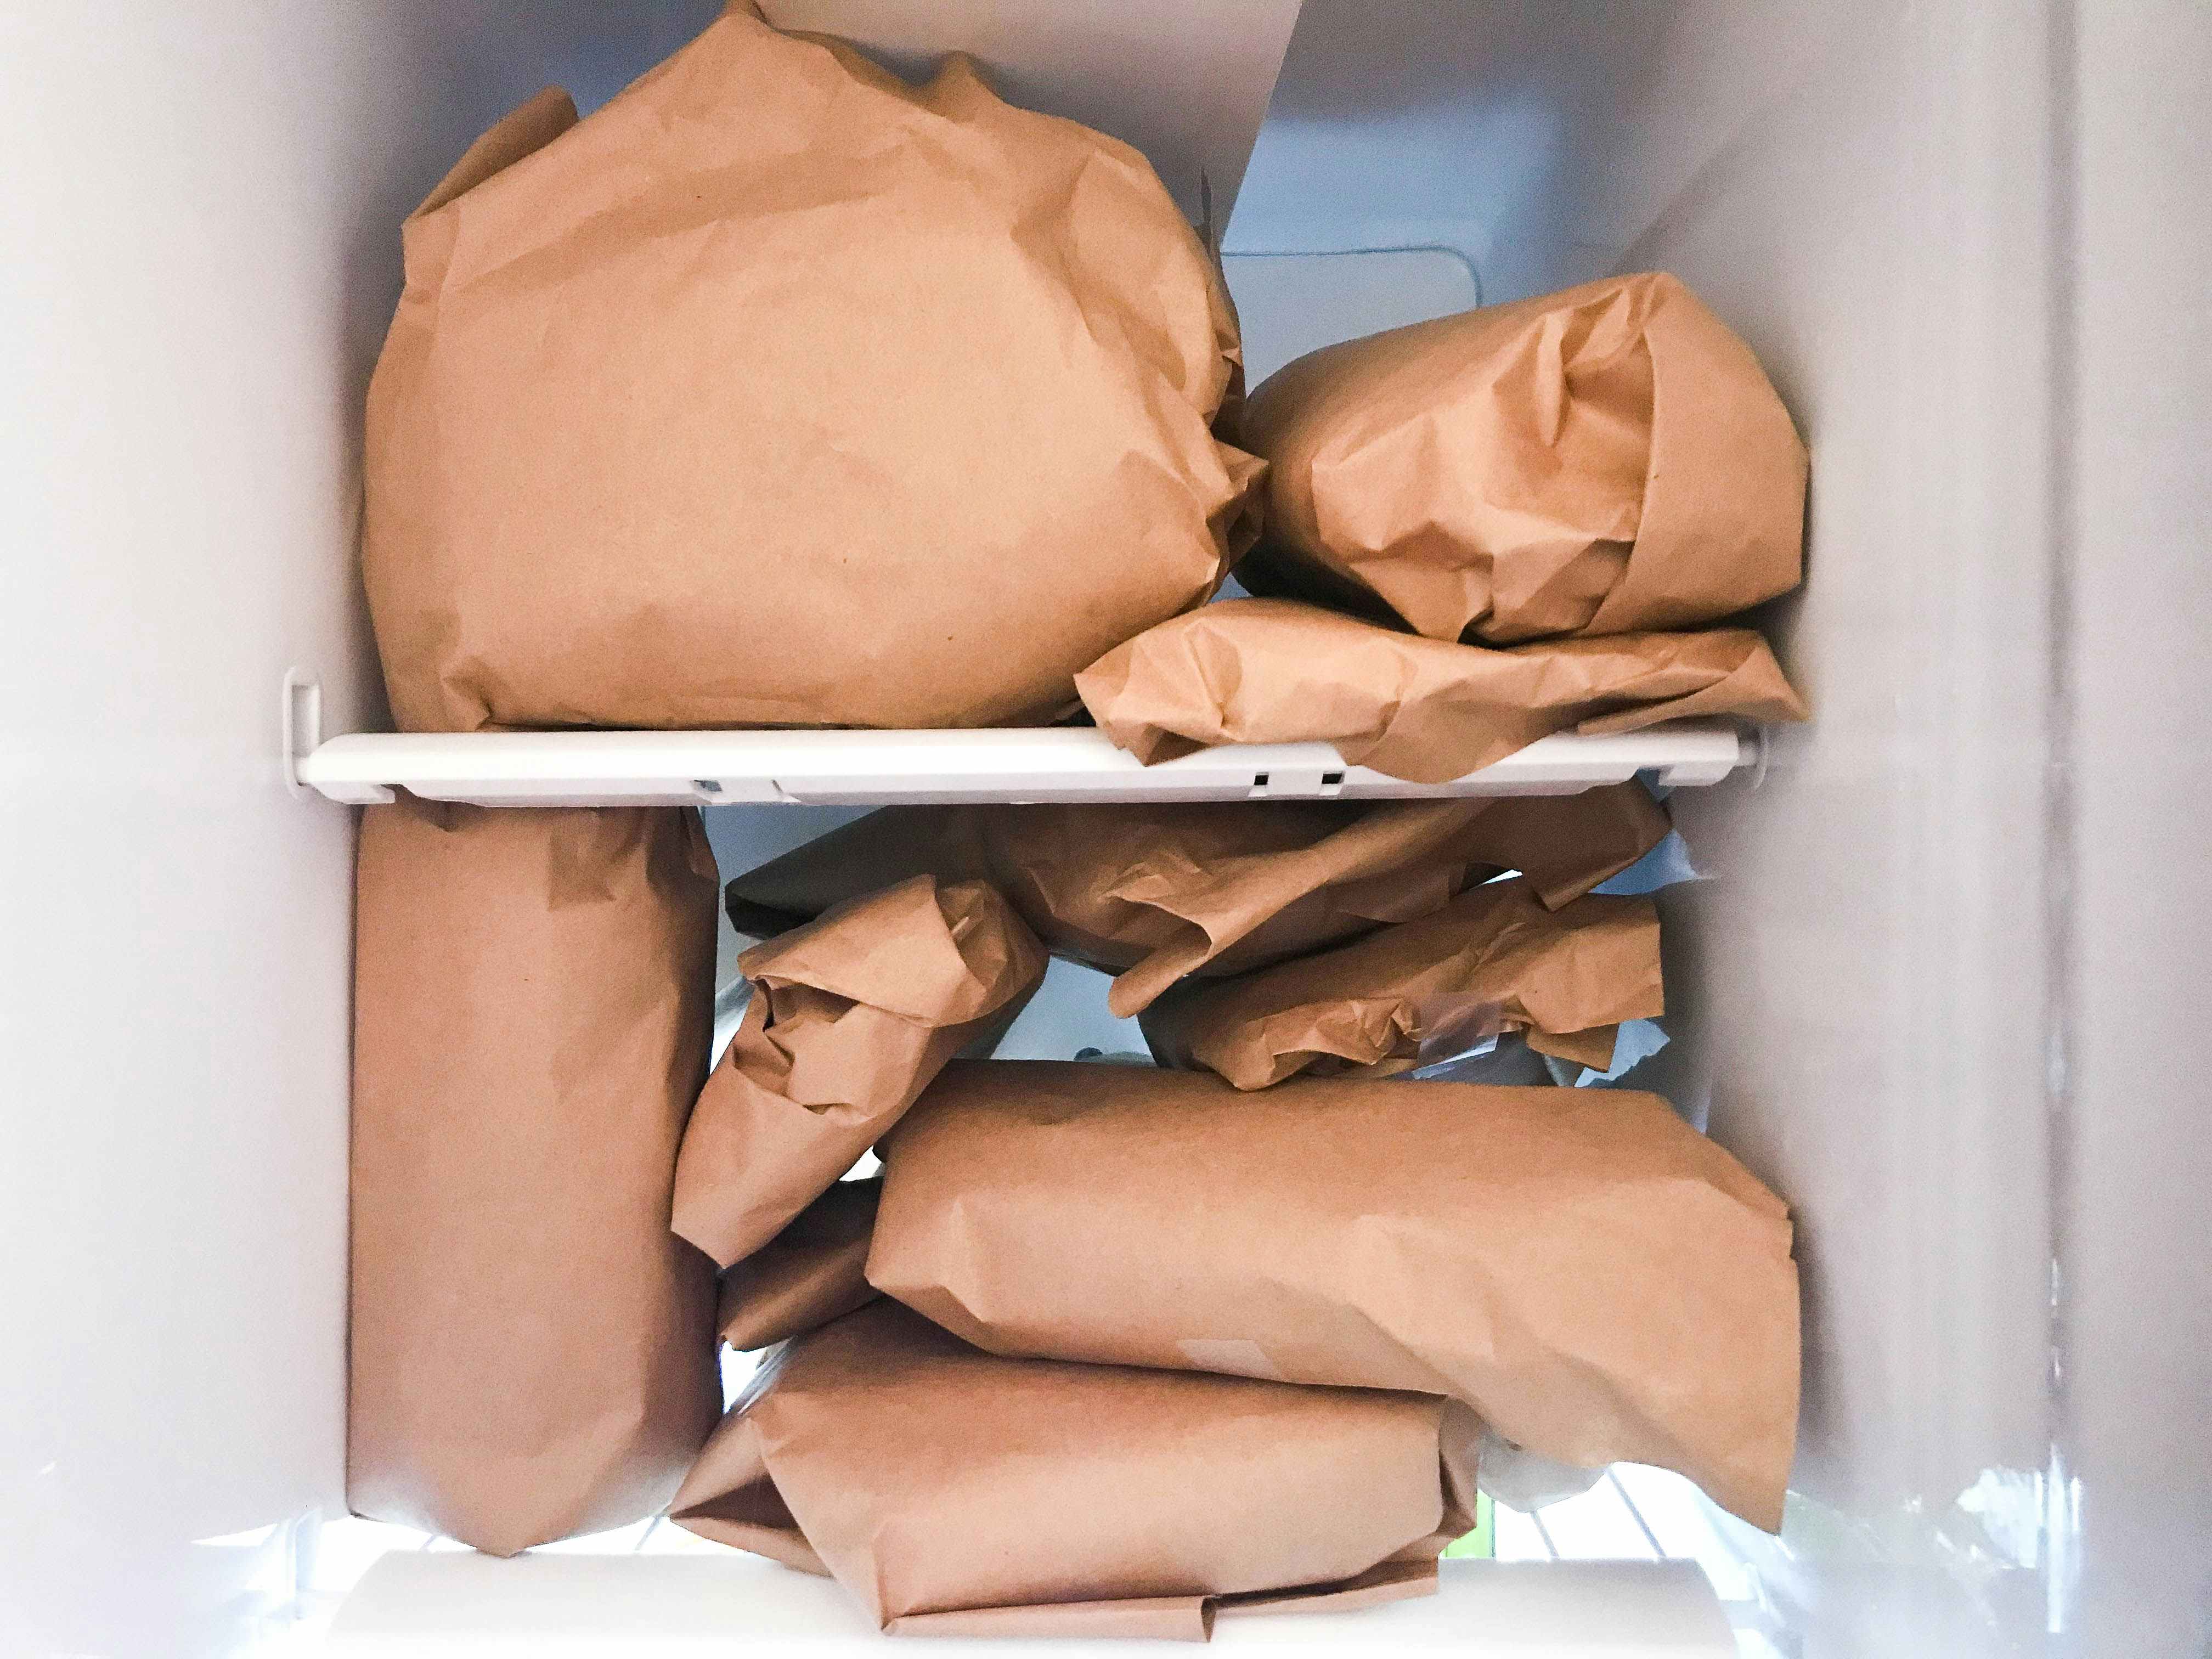 A freezer full of meat wrapped in brown paper.